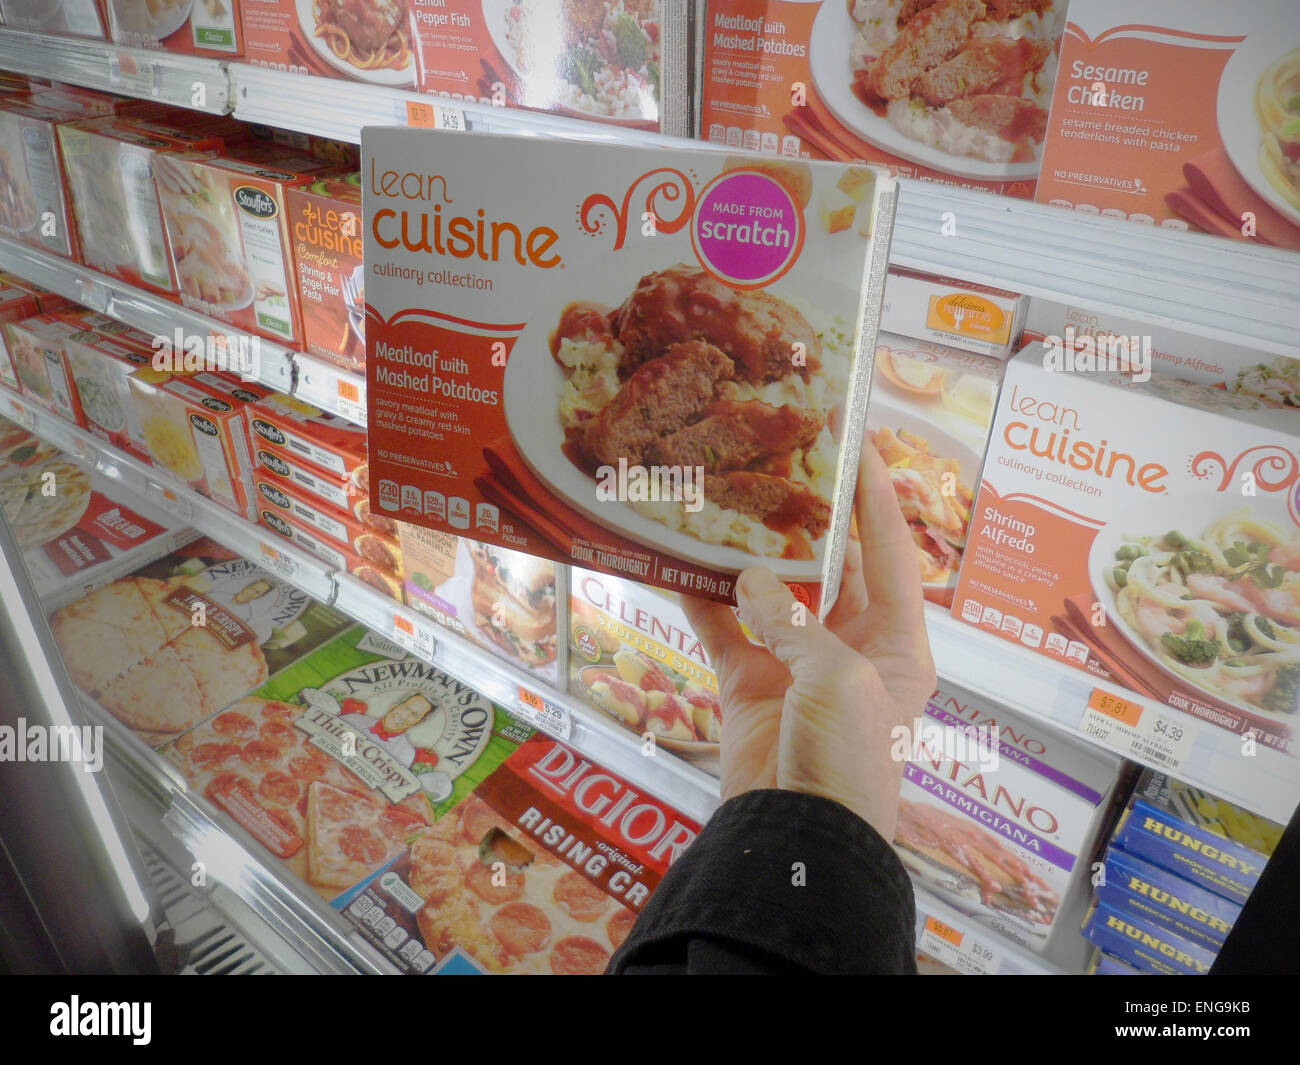 A shopper chooses a package of Nestlé's Lean Cuisine Meatloaf with Mashed Potatoes in a supermarket in New York on Monday, May 4, 2015. Frozen food product sales are flat or declining as consumers switch to products perceived as healthier. Nestlé's Lean Cuisine in particular has seen a large drop in sales. (© Richard B. Levine) Stock Photo